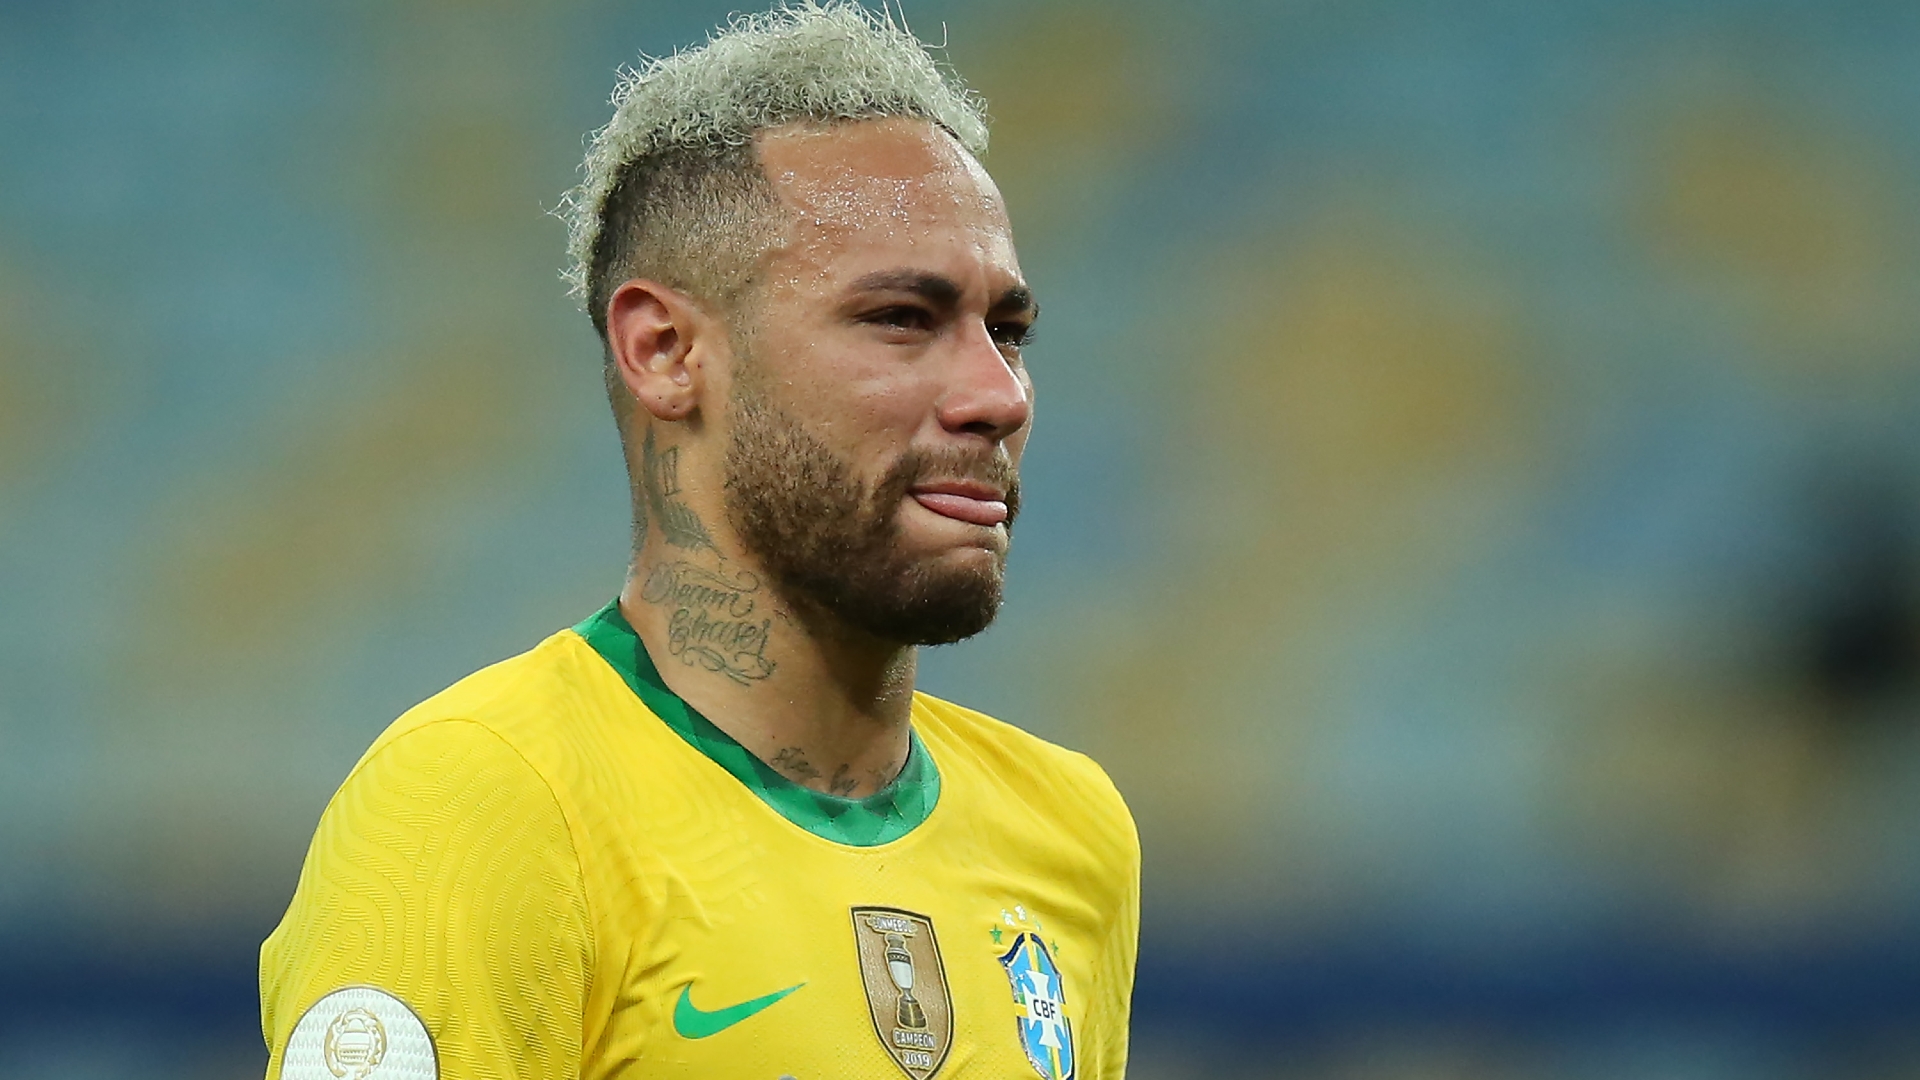 Mental issues facing elite athletes need to be discussed more than ever after Neymar's announcement to quit Brazil after World Cup 2022